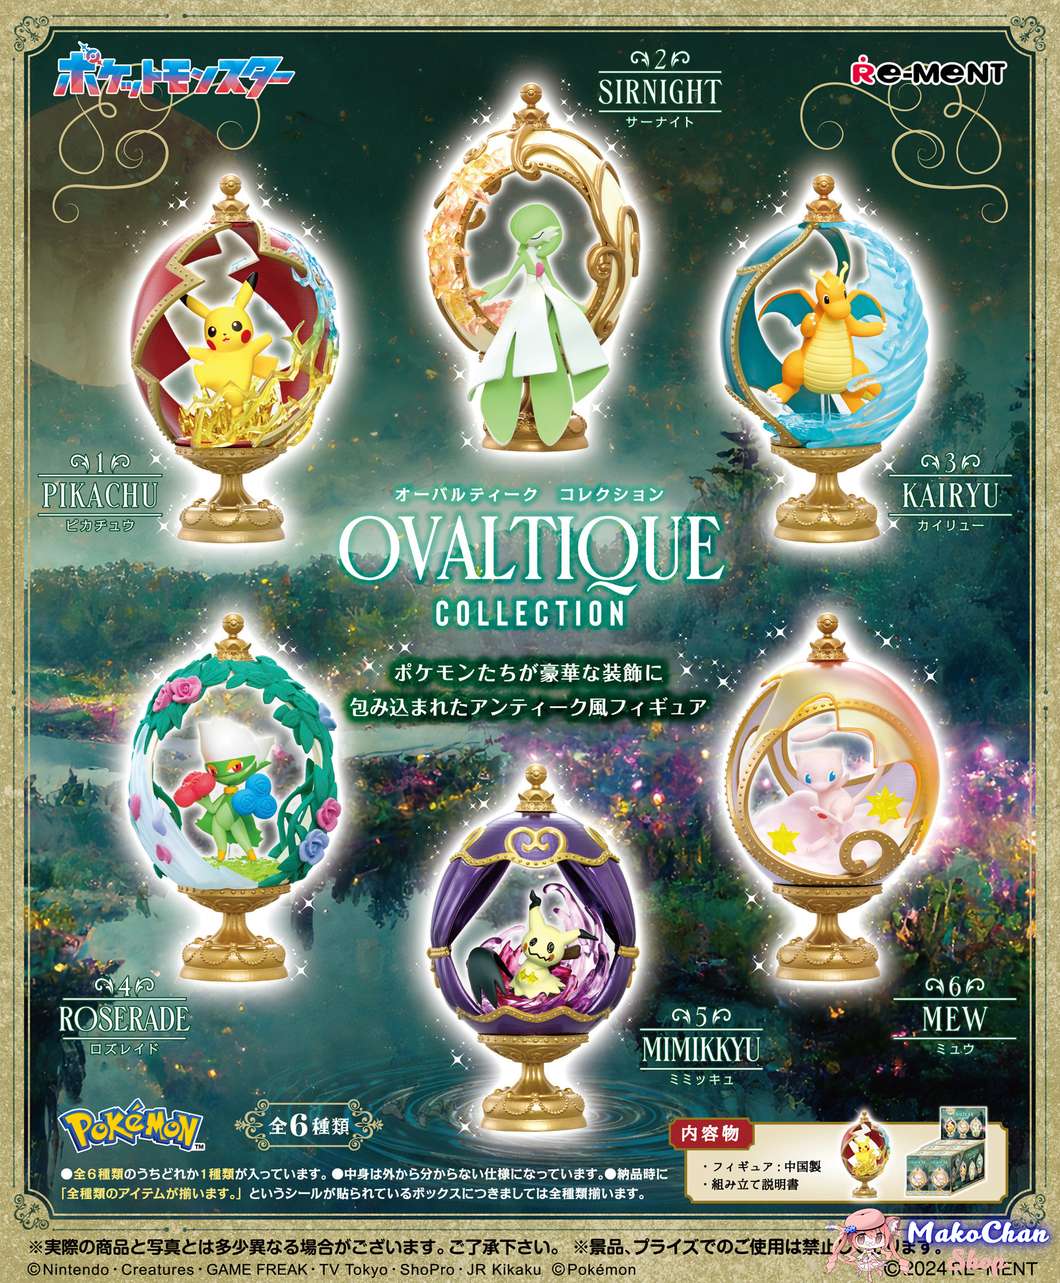 Re-ment: Ovaltique Collection1 (pre-order)